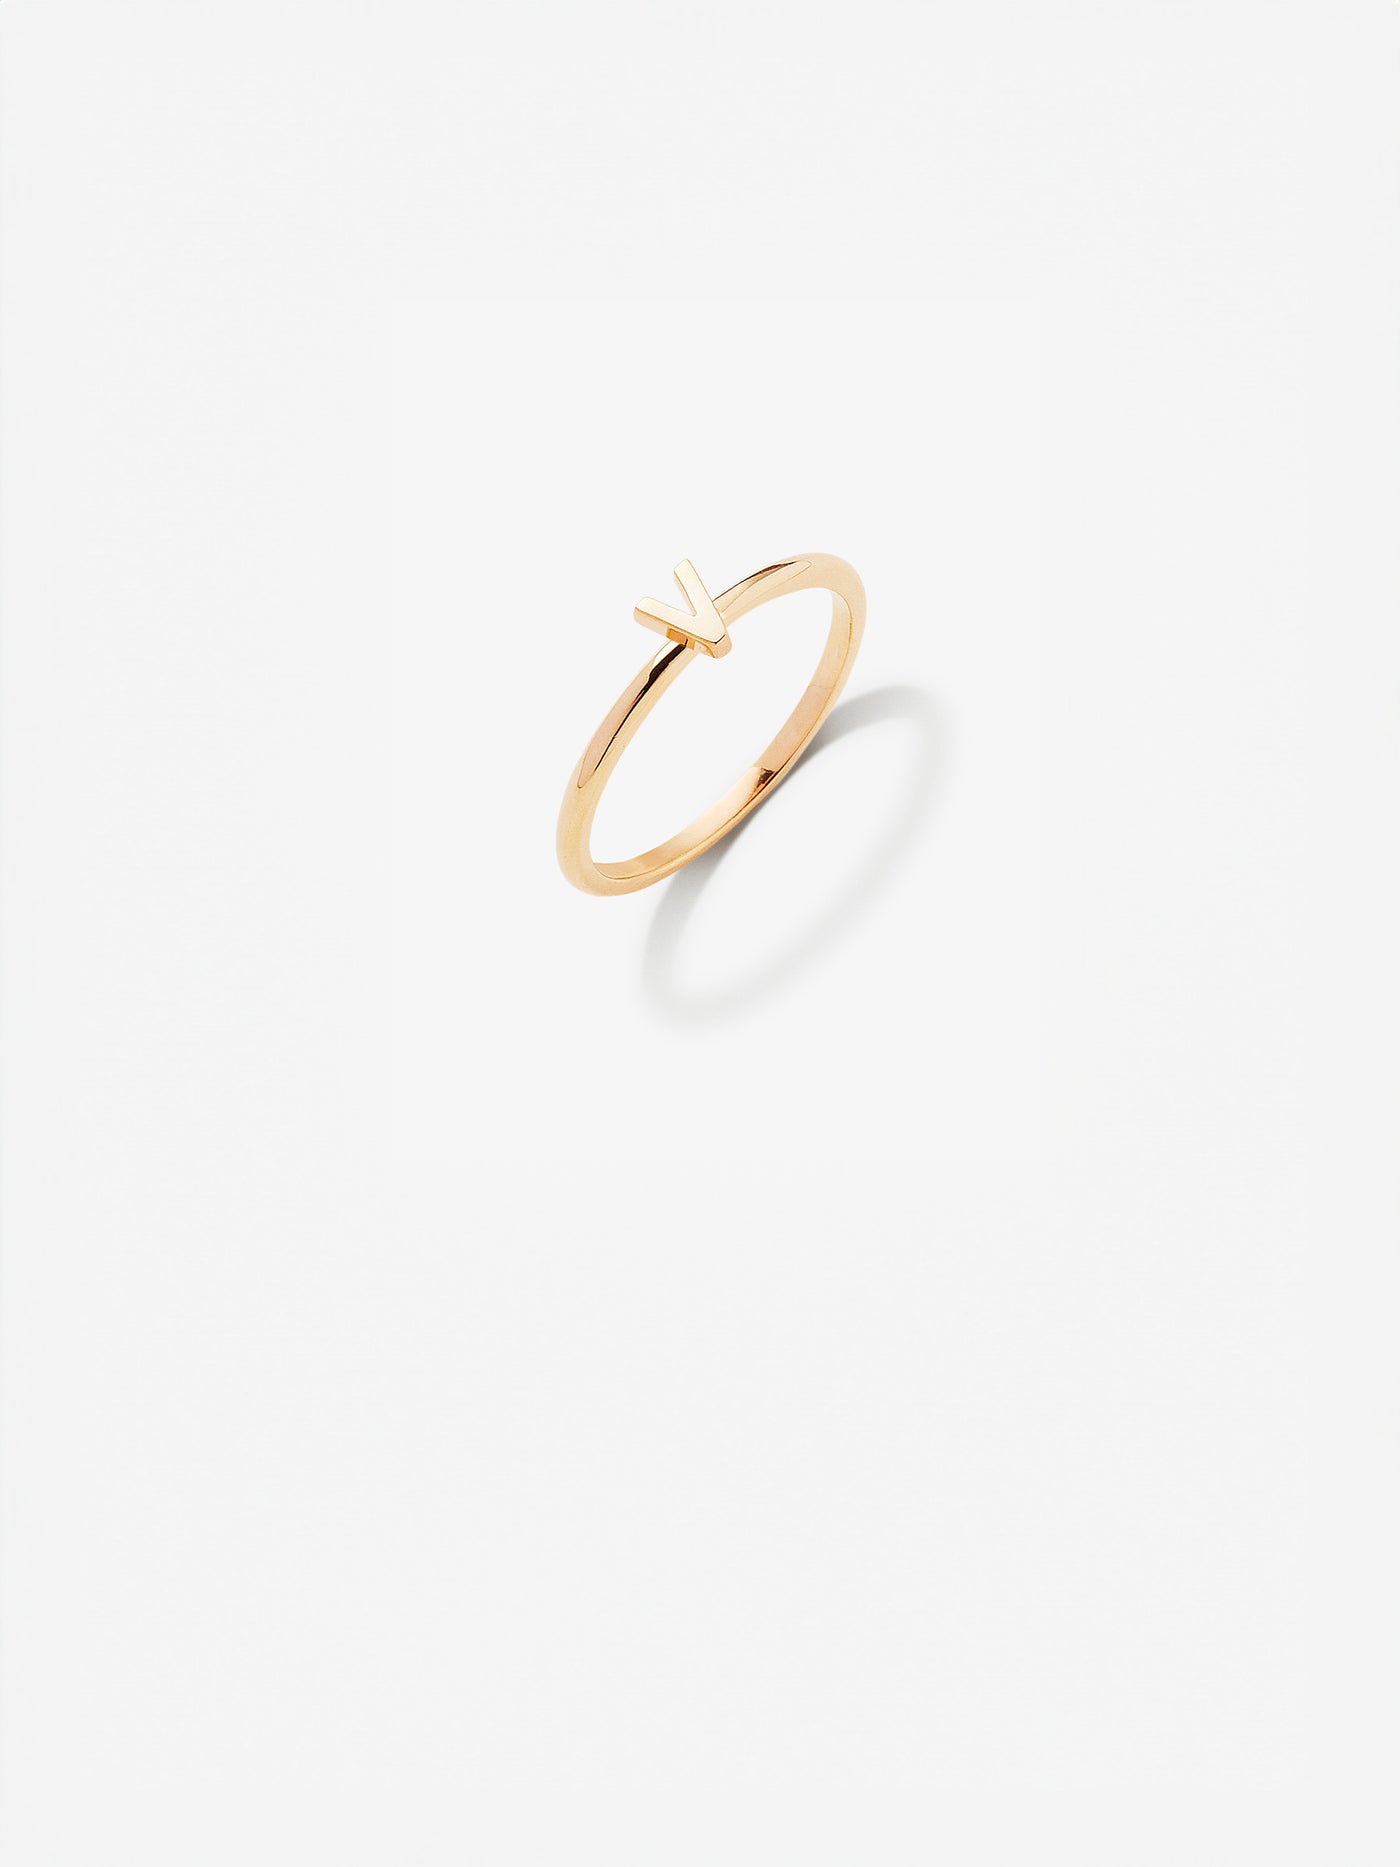 Close-up image of a personalised V gold ring adorned with intricate, miniature dimensional letters from the alphabet on a light grey background 